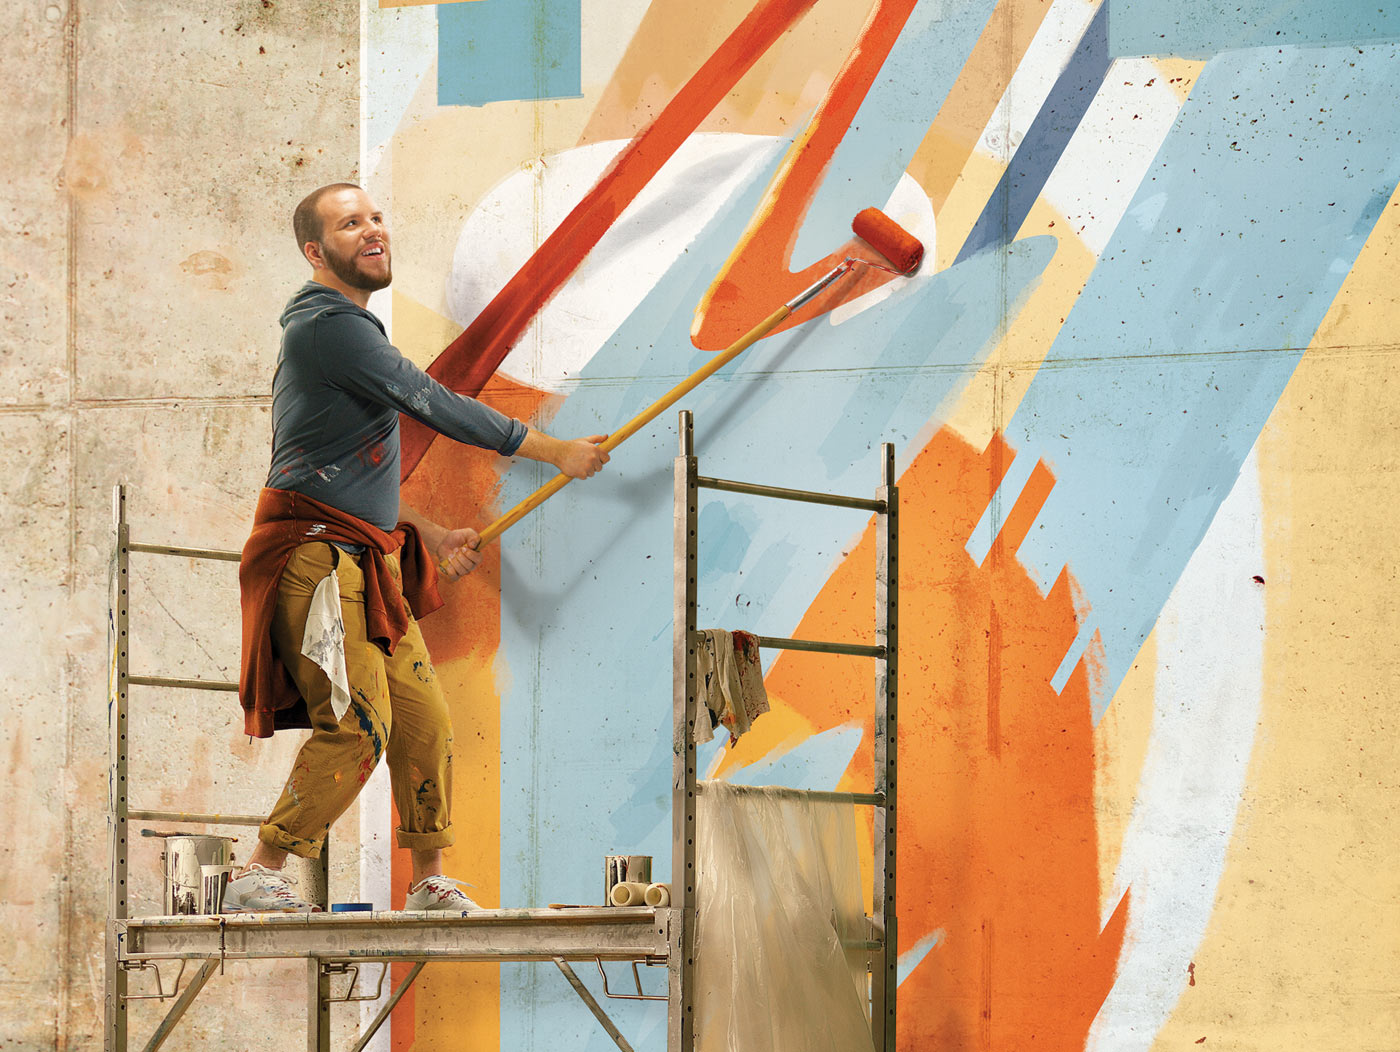 Man painting a large wall